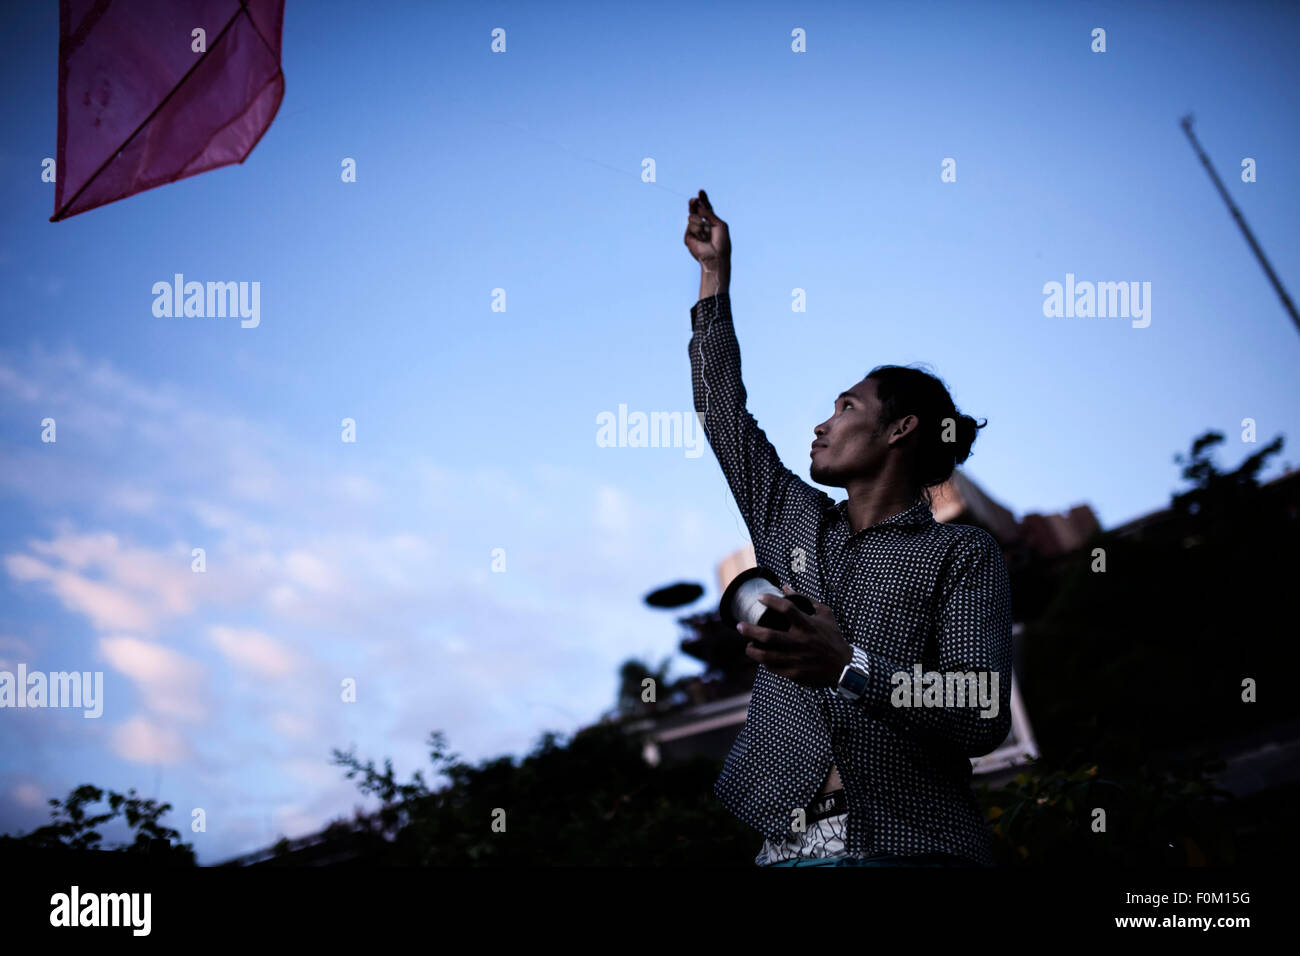 Young man flying a kite, Bali Stock Photo